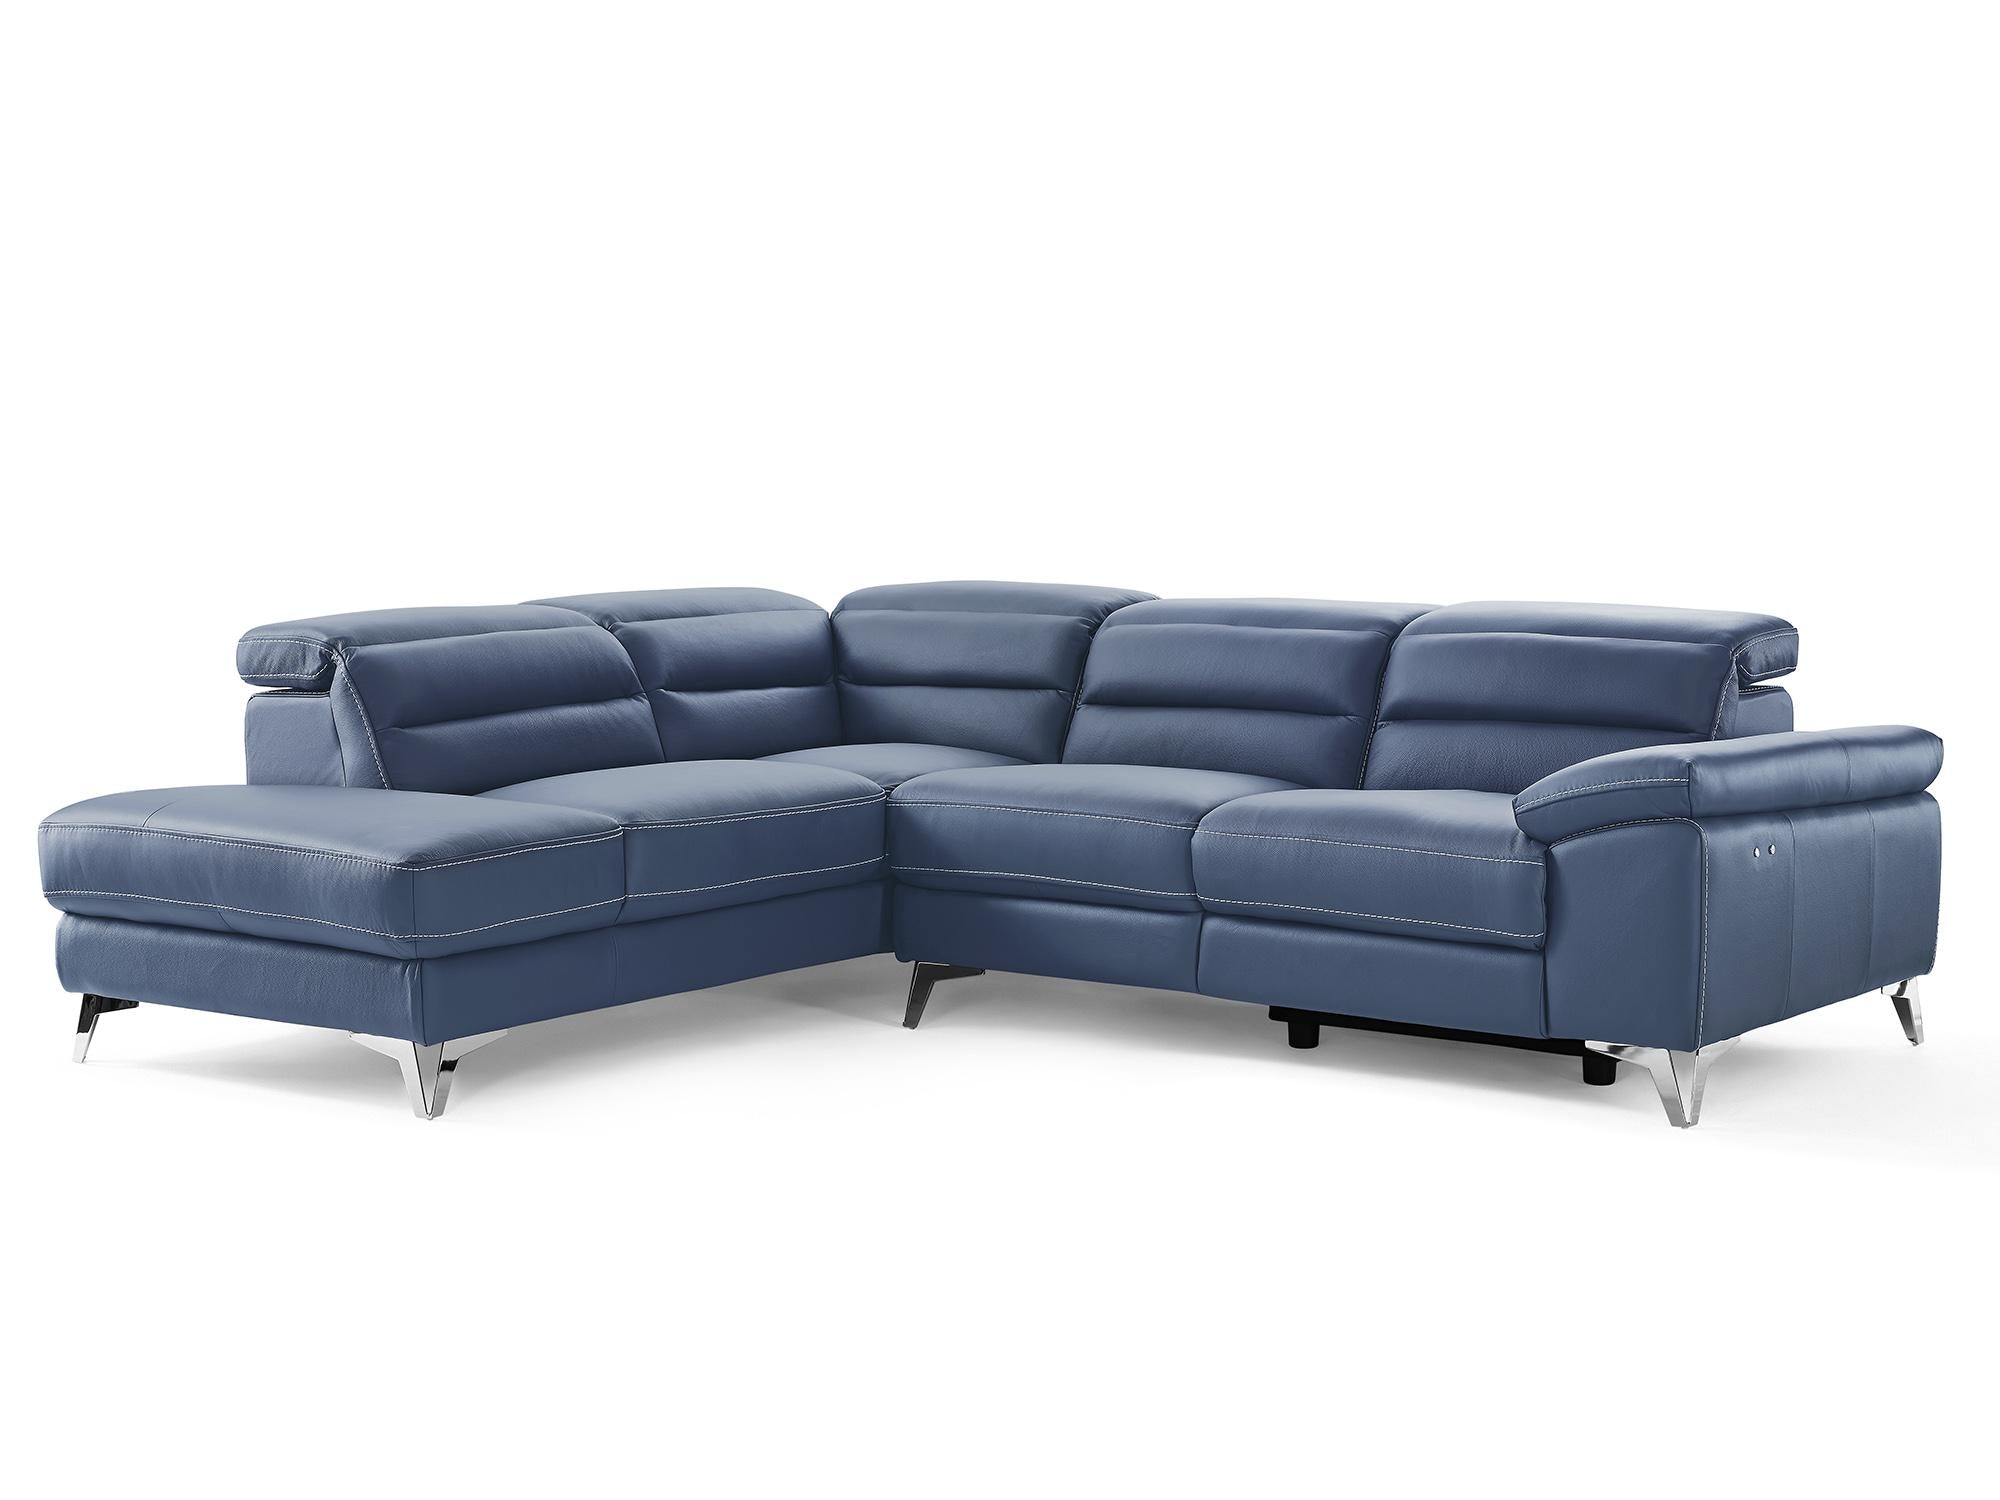 109 X 88 X 31 X 40 Navy Blue Leather Sectional